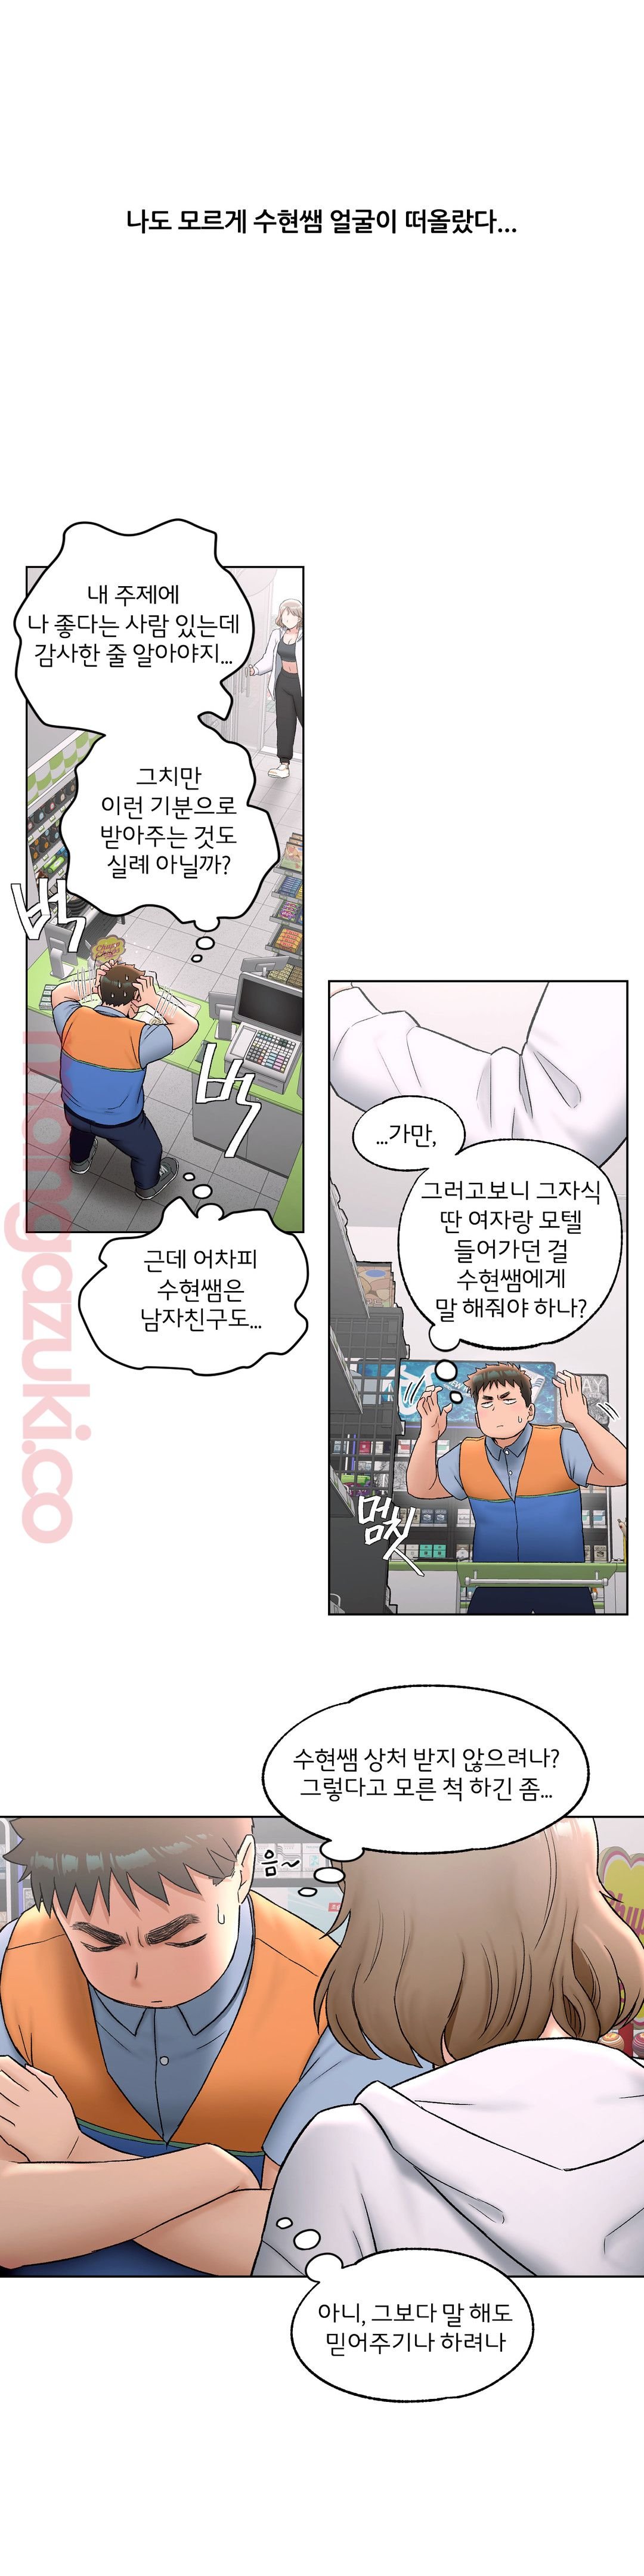 Sexercise Raw - Chapter 51 Page 9